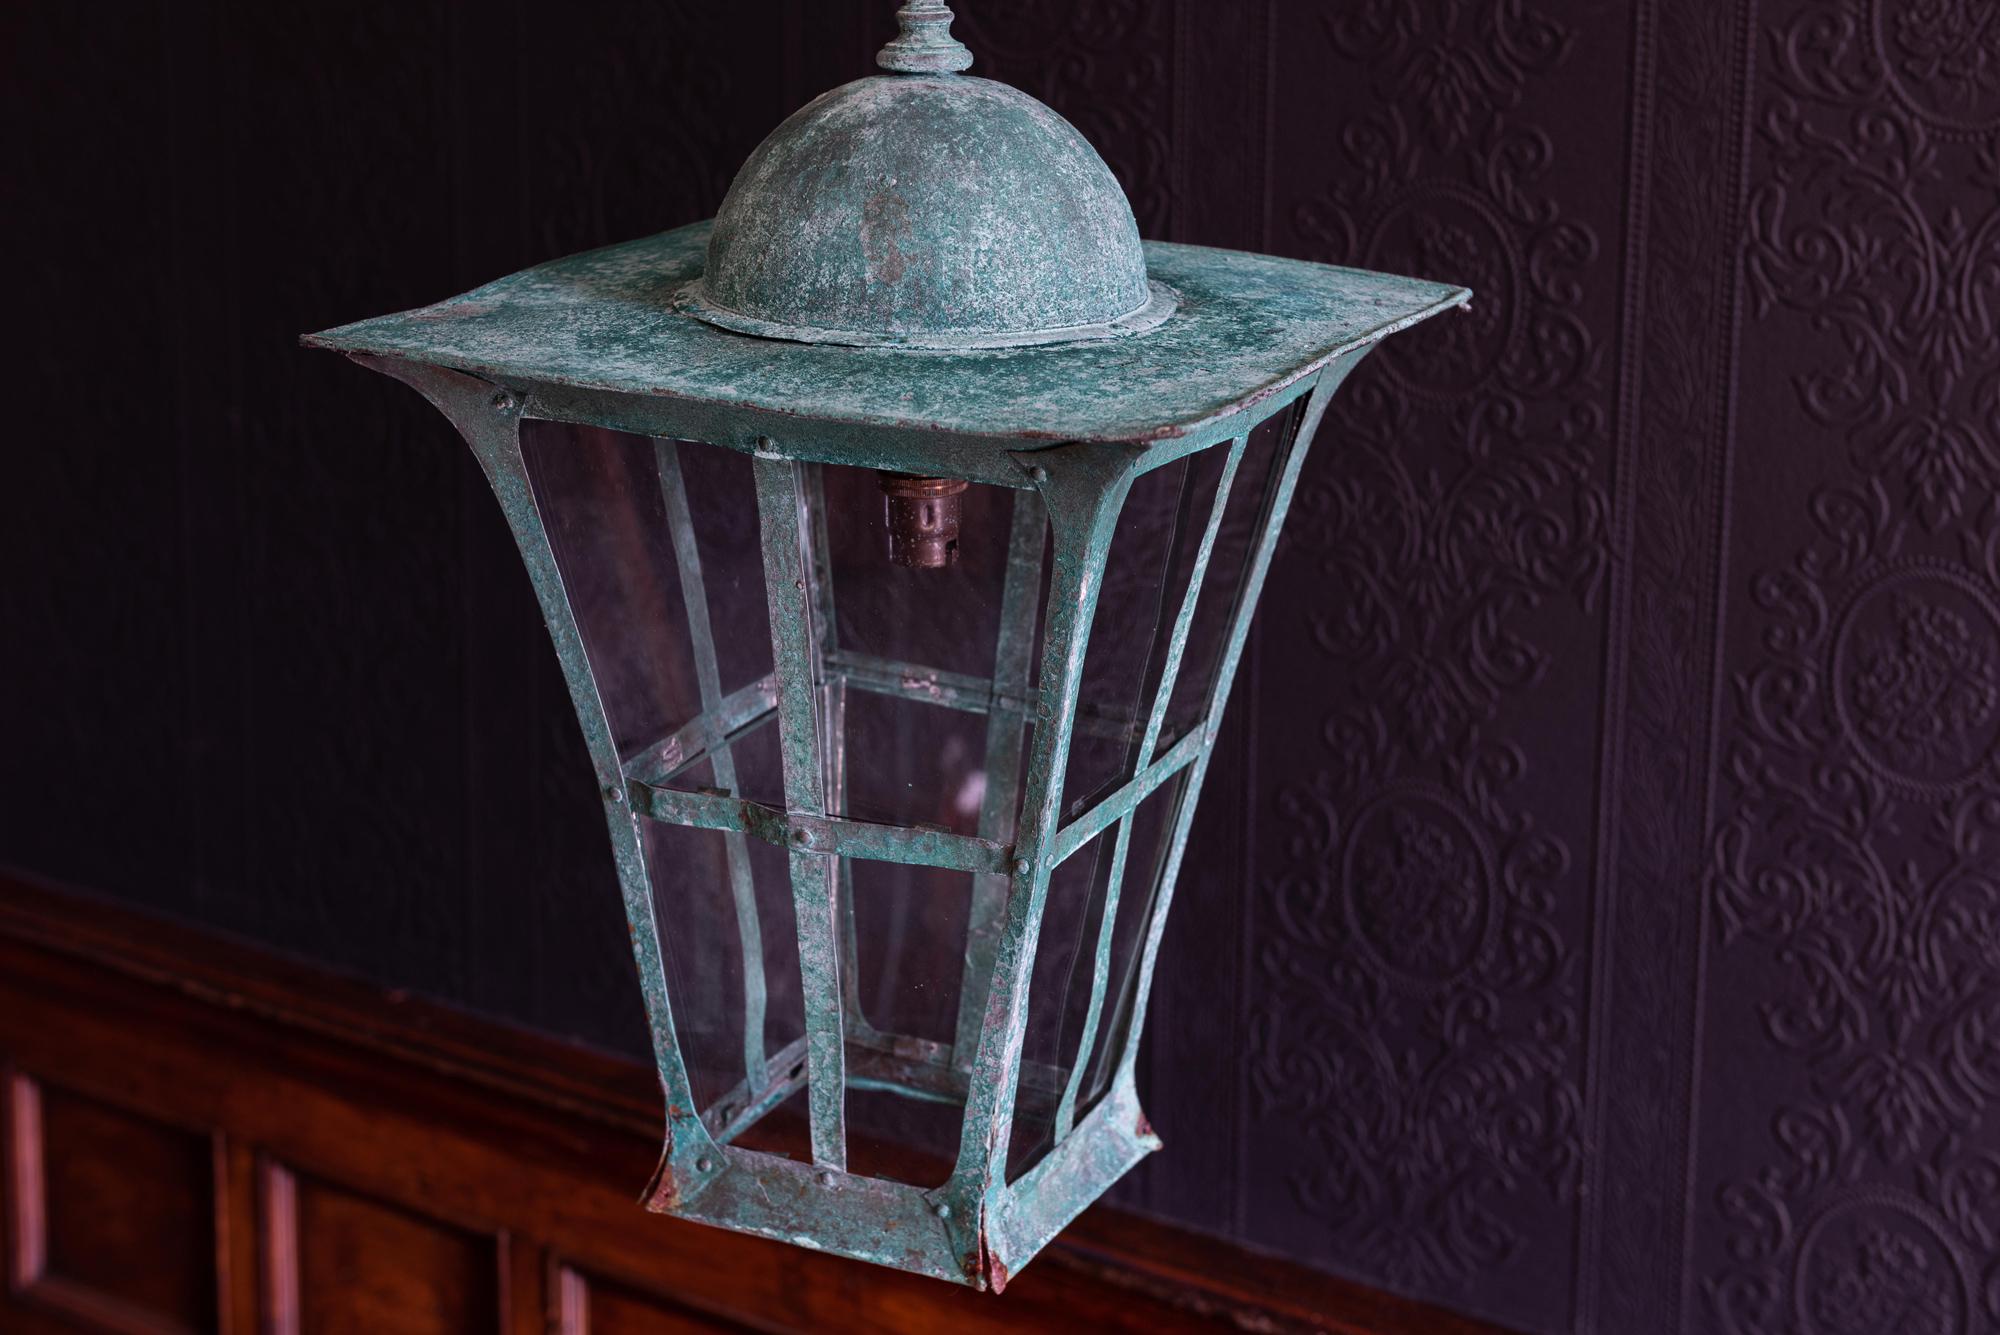 Verdigris copper Arts & Crafts lantern,
circa 1900.

Riveted copper.

With 1m of silk flex, 1m of heavy gauge antique brass chain and bronze ceiling hook

Re-glazed rewired and pat tested - ready to hang.

Measures: 66 H (to ring) x 30 D x